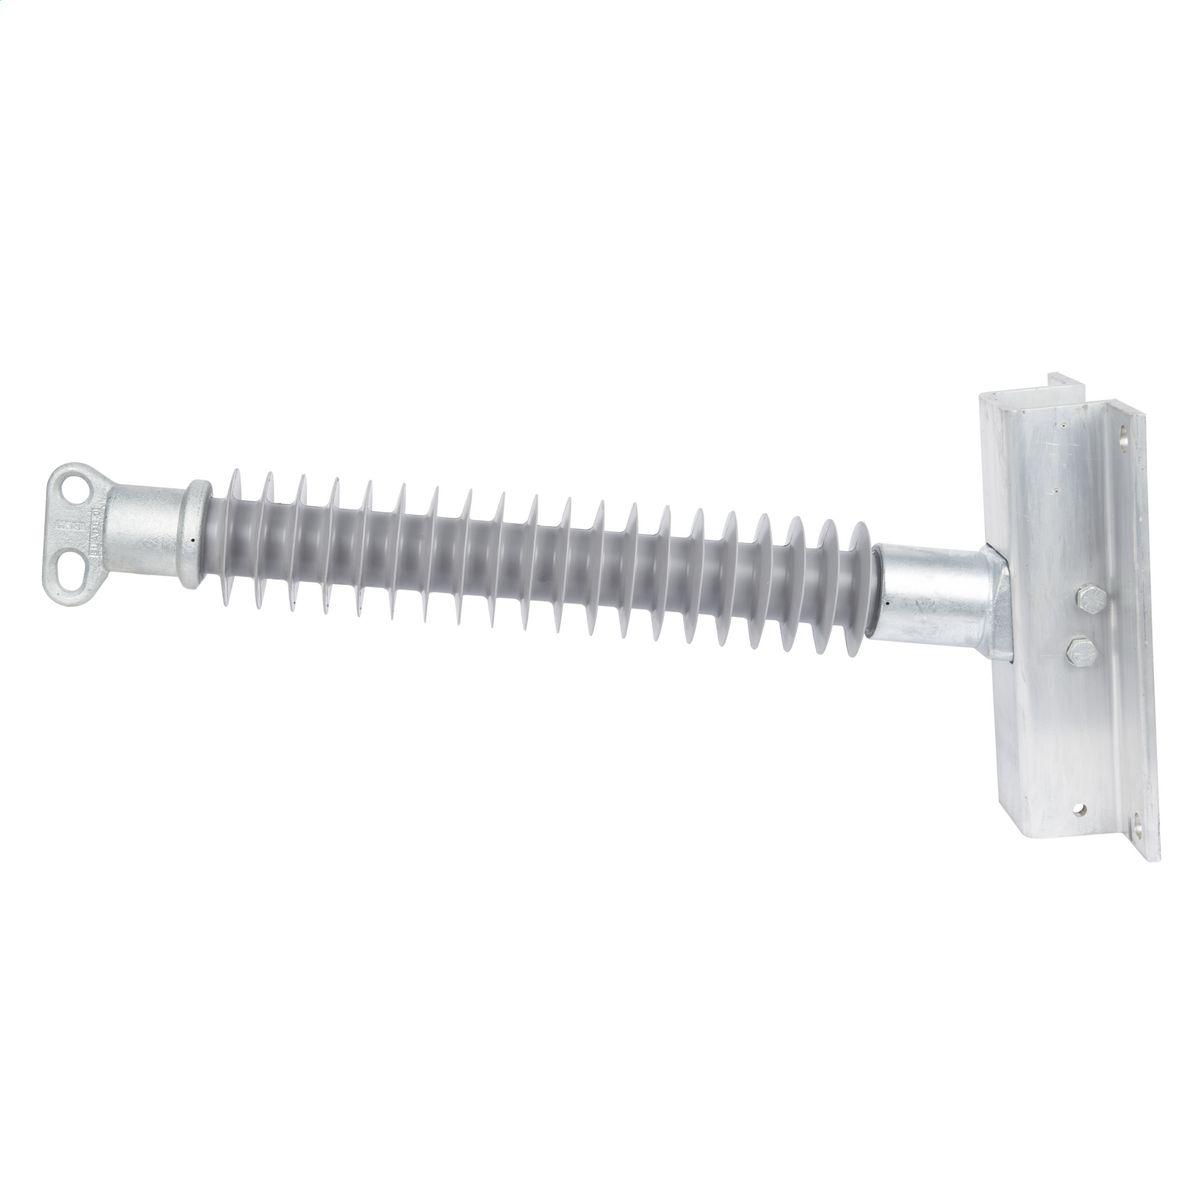 Hubbell P350090S0030 3.5" Line Post, 2 hole blade,Aluminum  flat base 9x13 - 7/8" bolts  ; Made from hydrophobic silicone polymer ; 